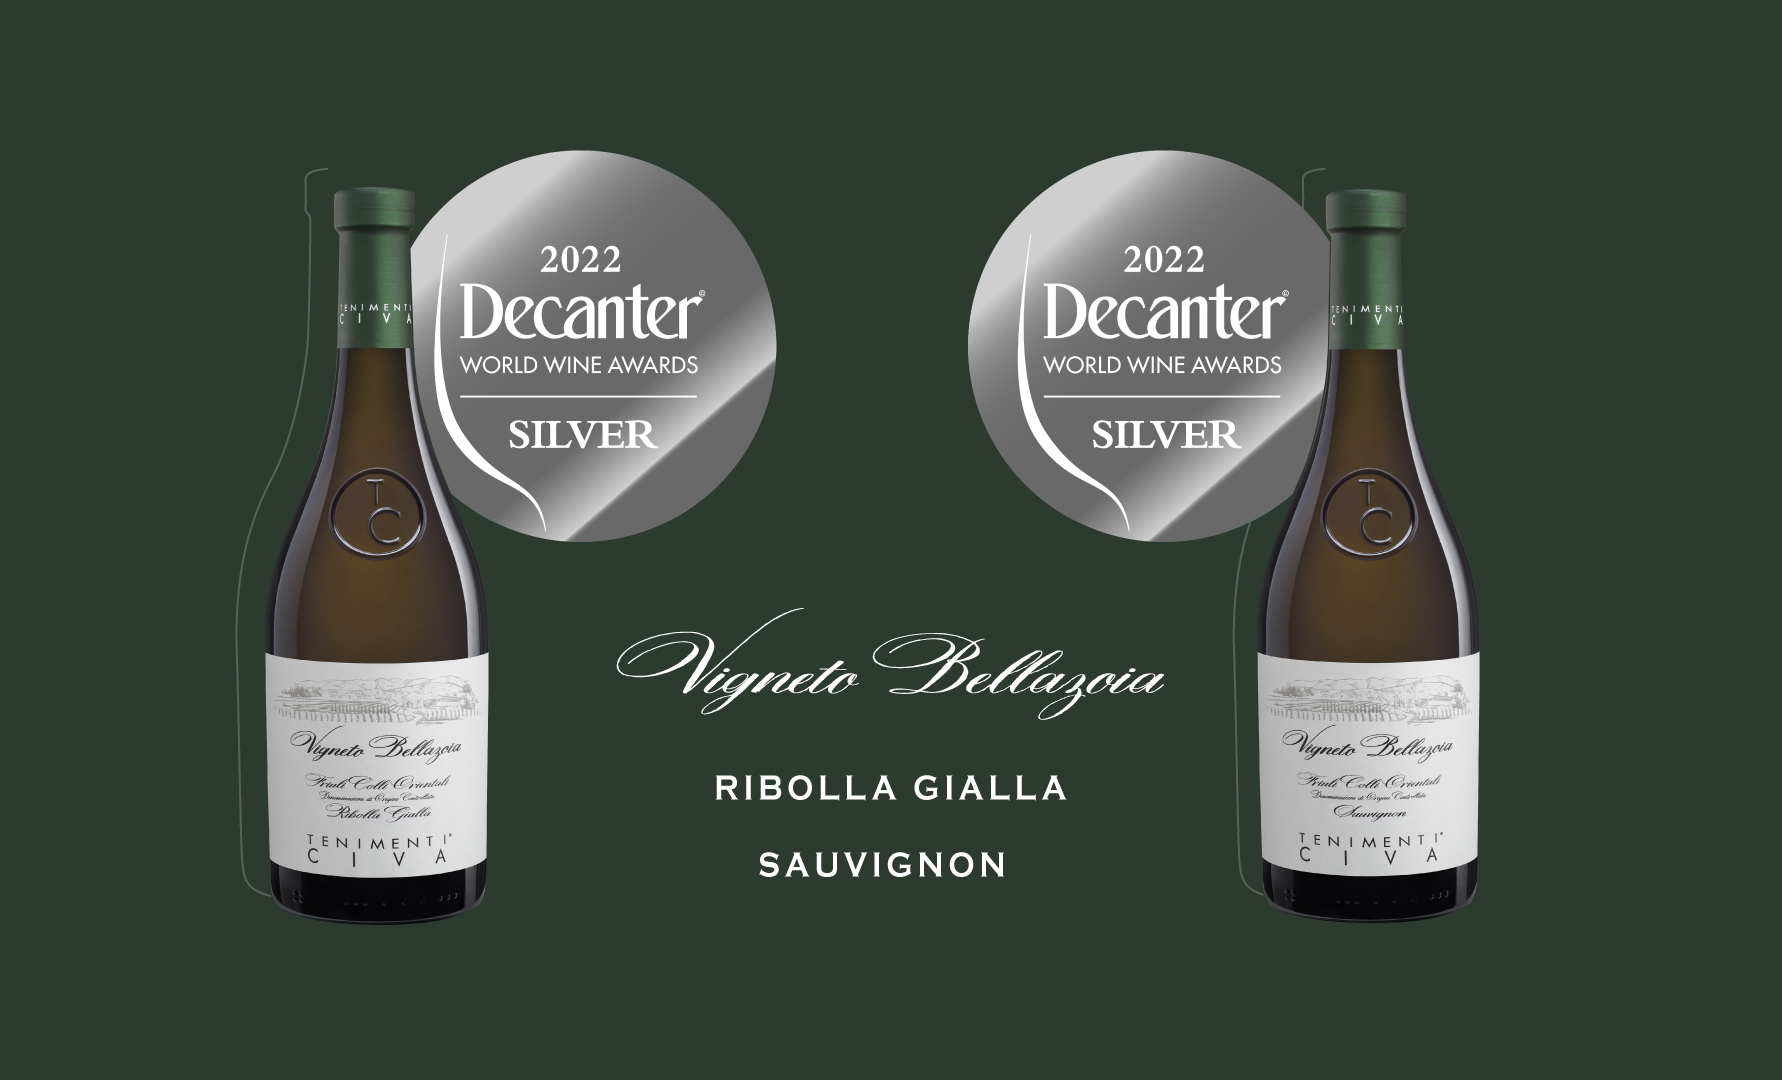 Vigneto Bellazoia walks off with two silver medals at the Decanter World Wine Awards